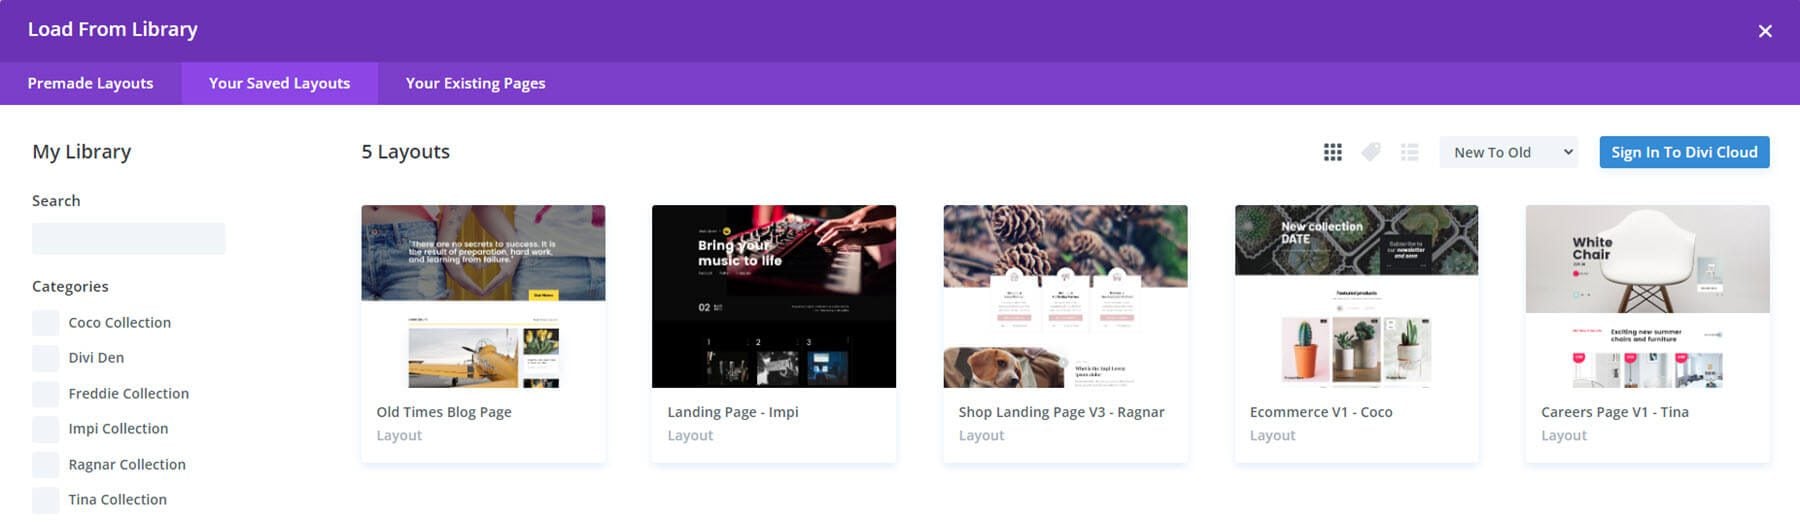 Divi Den Pro Layout Library in the Divi Theme Builder